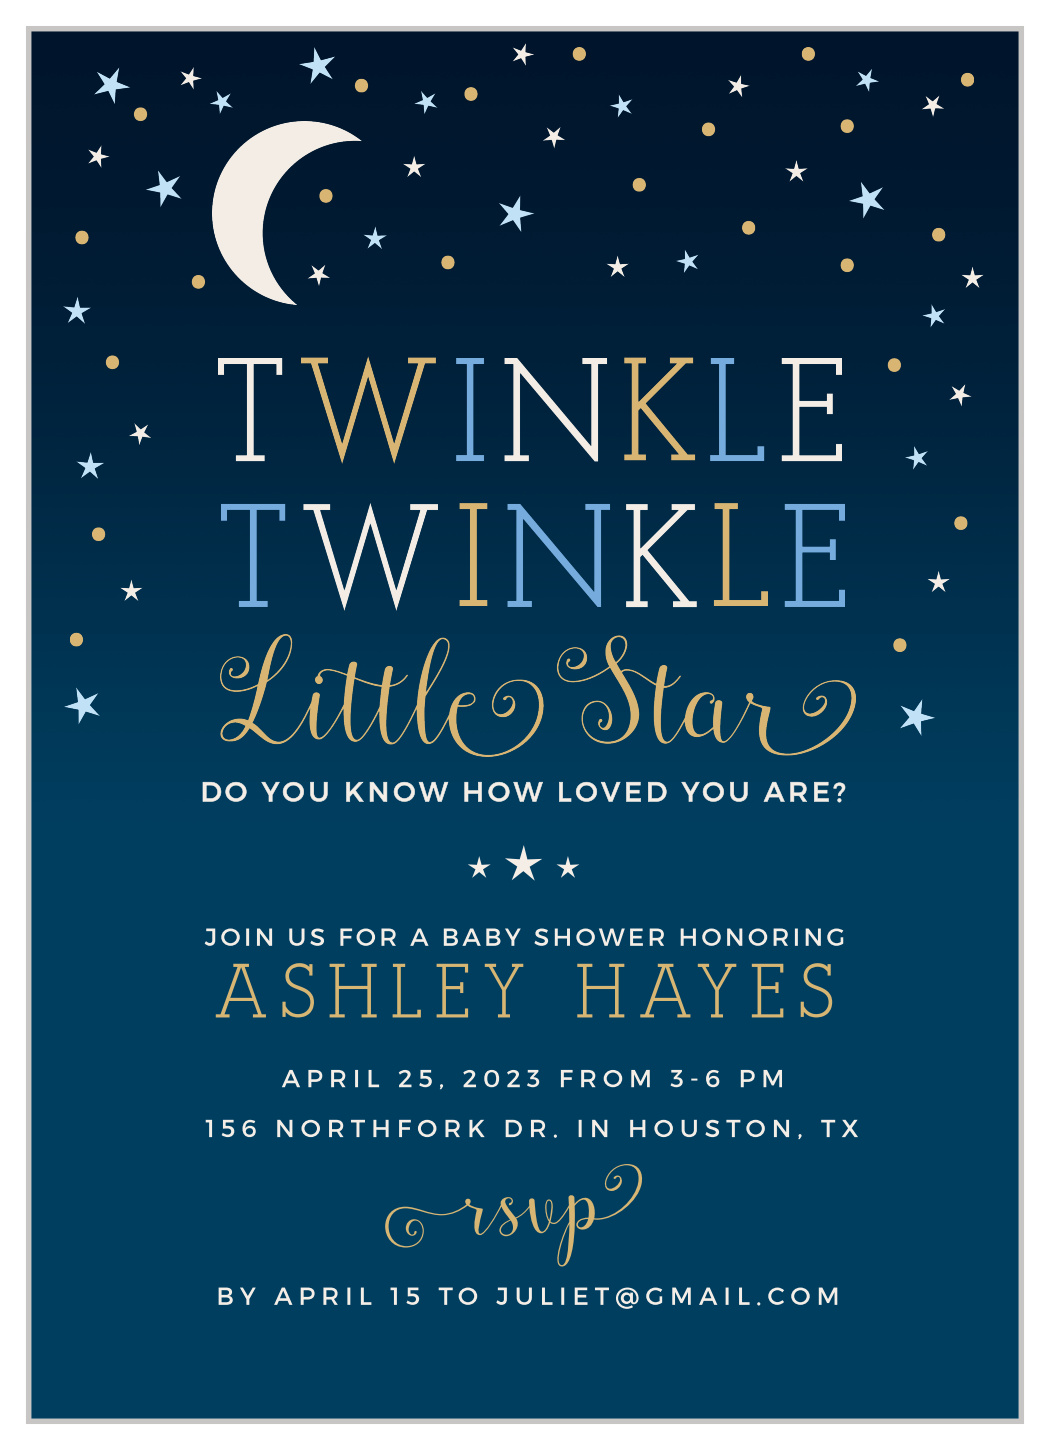 twinkle-little-star-baby-shower-invitations-by-basic-invite